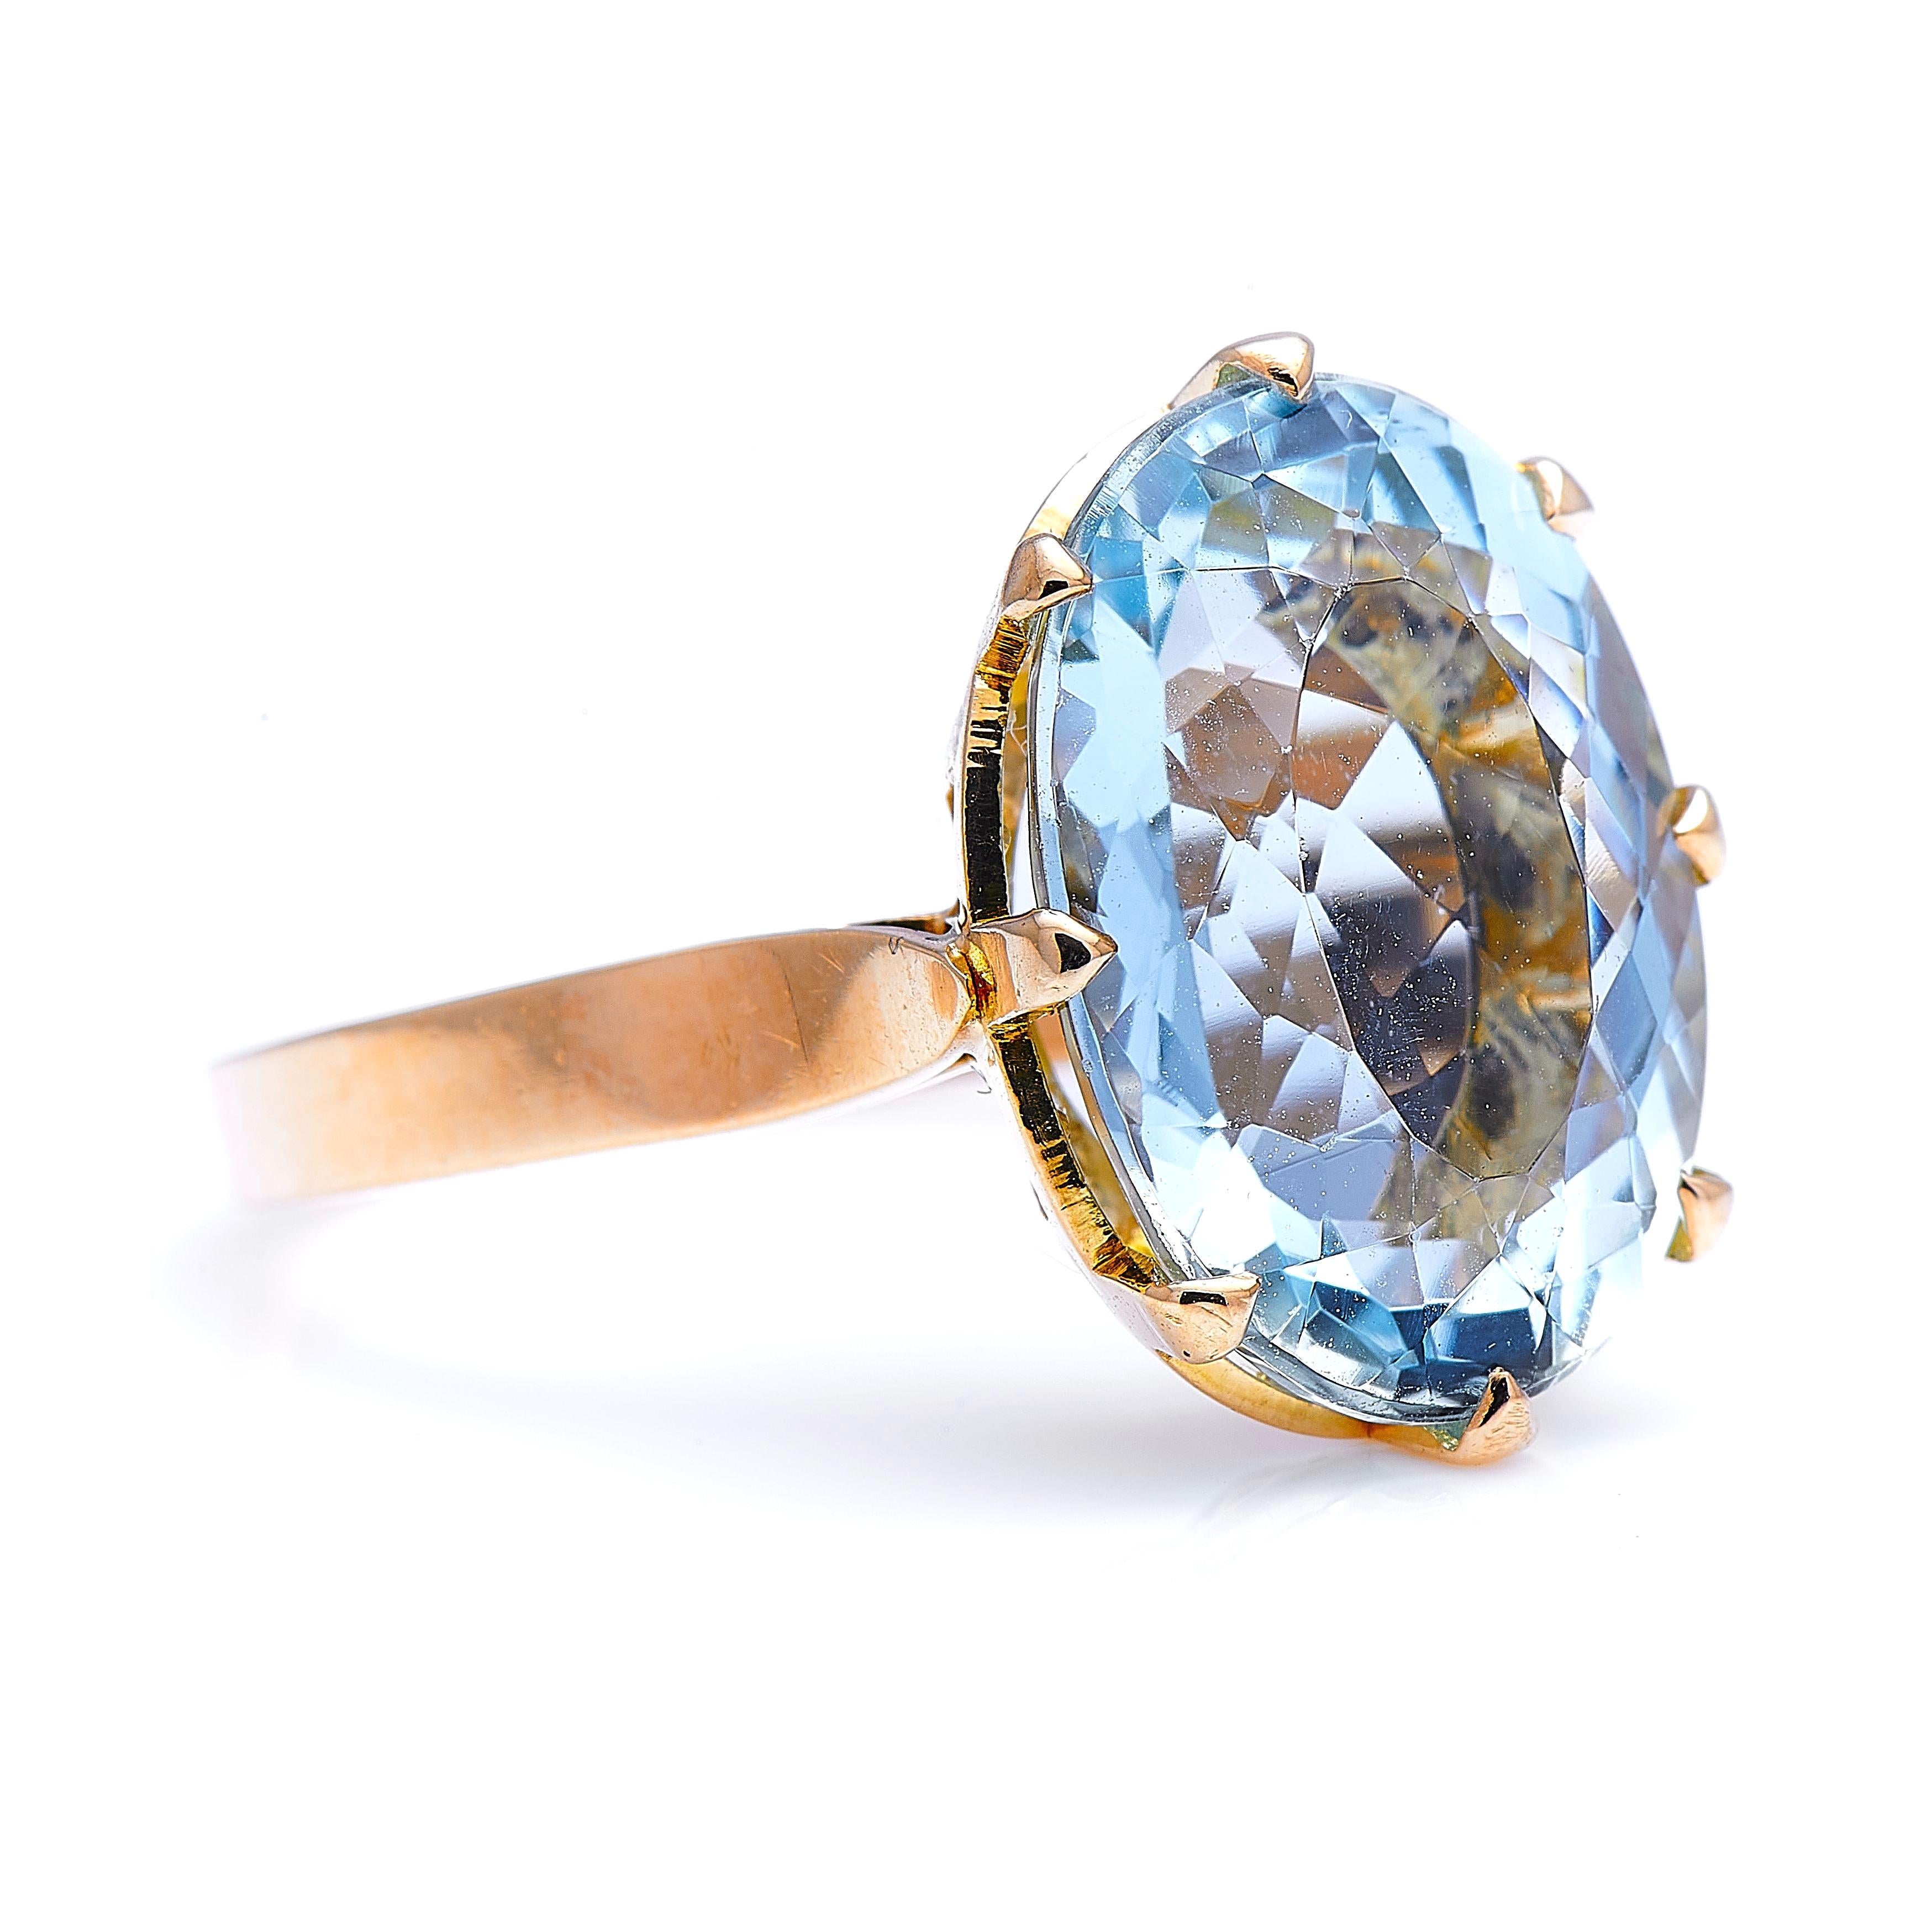 Aquamarine ring, late 20th century. A pretty single stone aquamarine set in a simple but beautifully executed 18ct gold mount.

Place Of Origin
United Kingdom

Stone Type
Aquamarine: Approx. 14.5mm x 10.5mm x 7mm  

Stone Dimensions
Height of